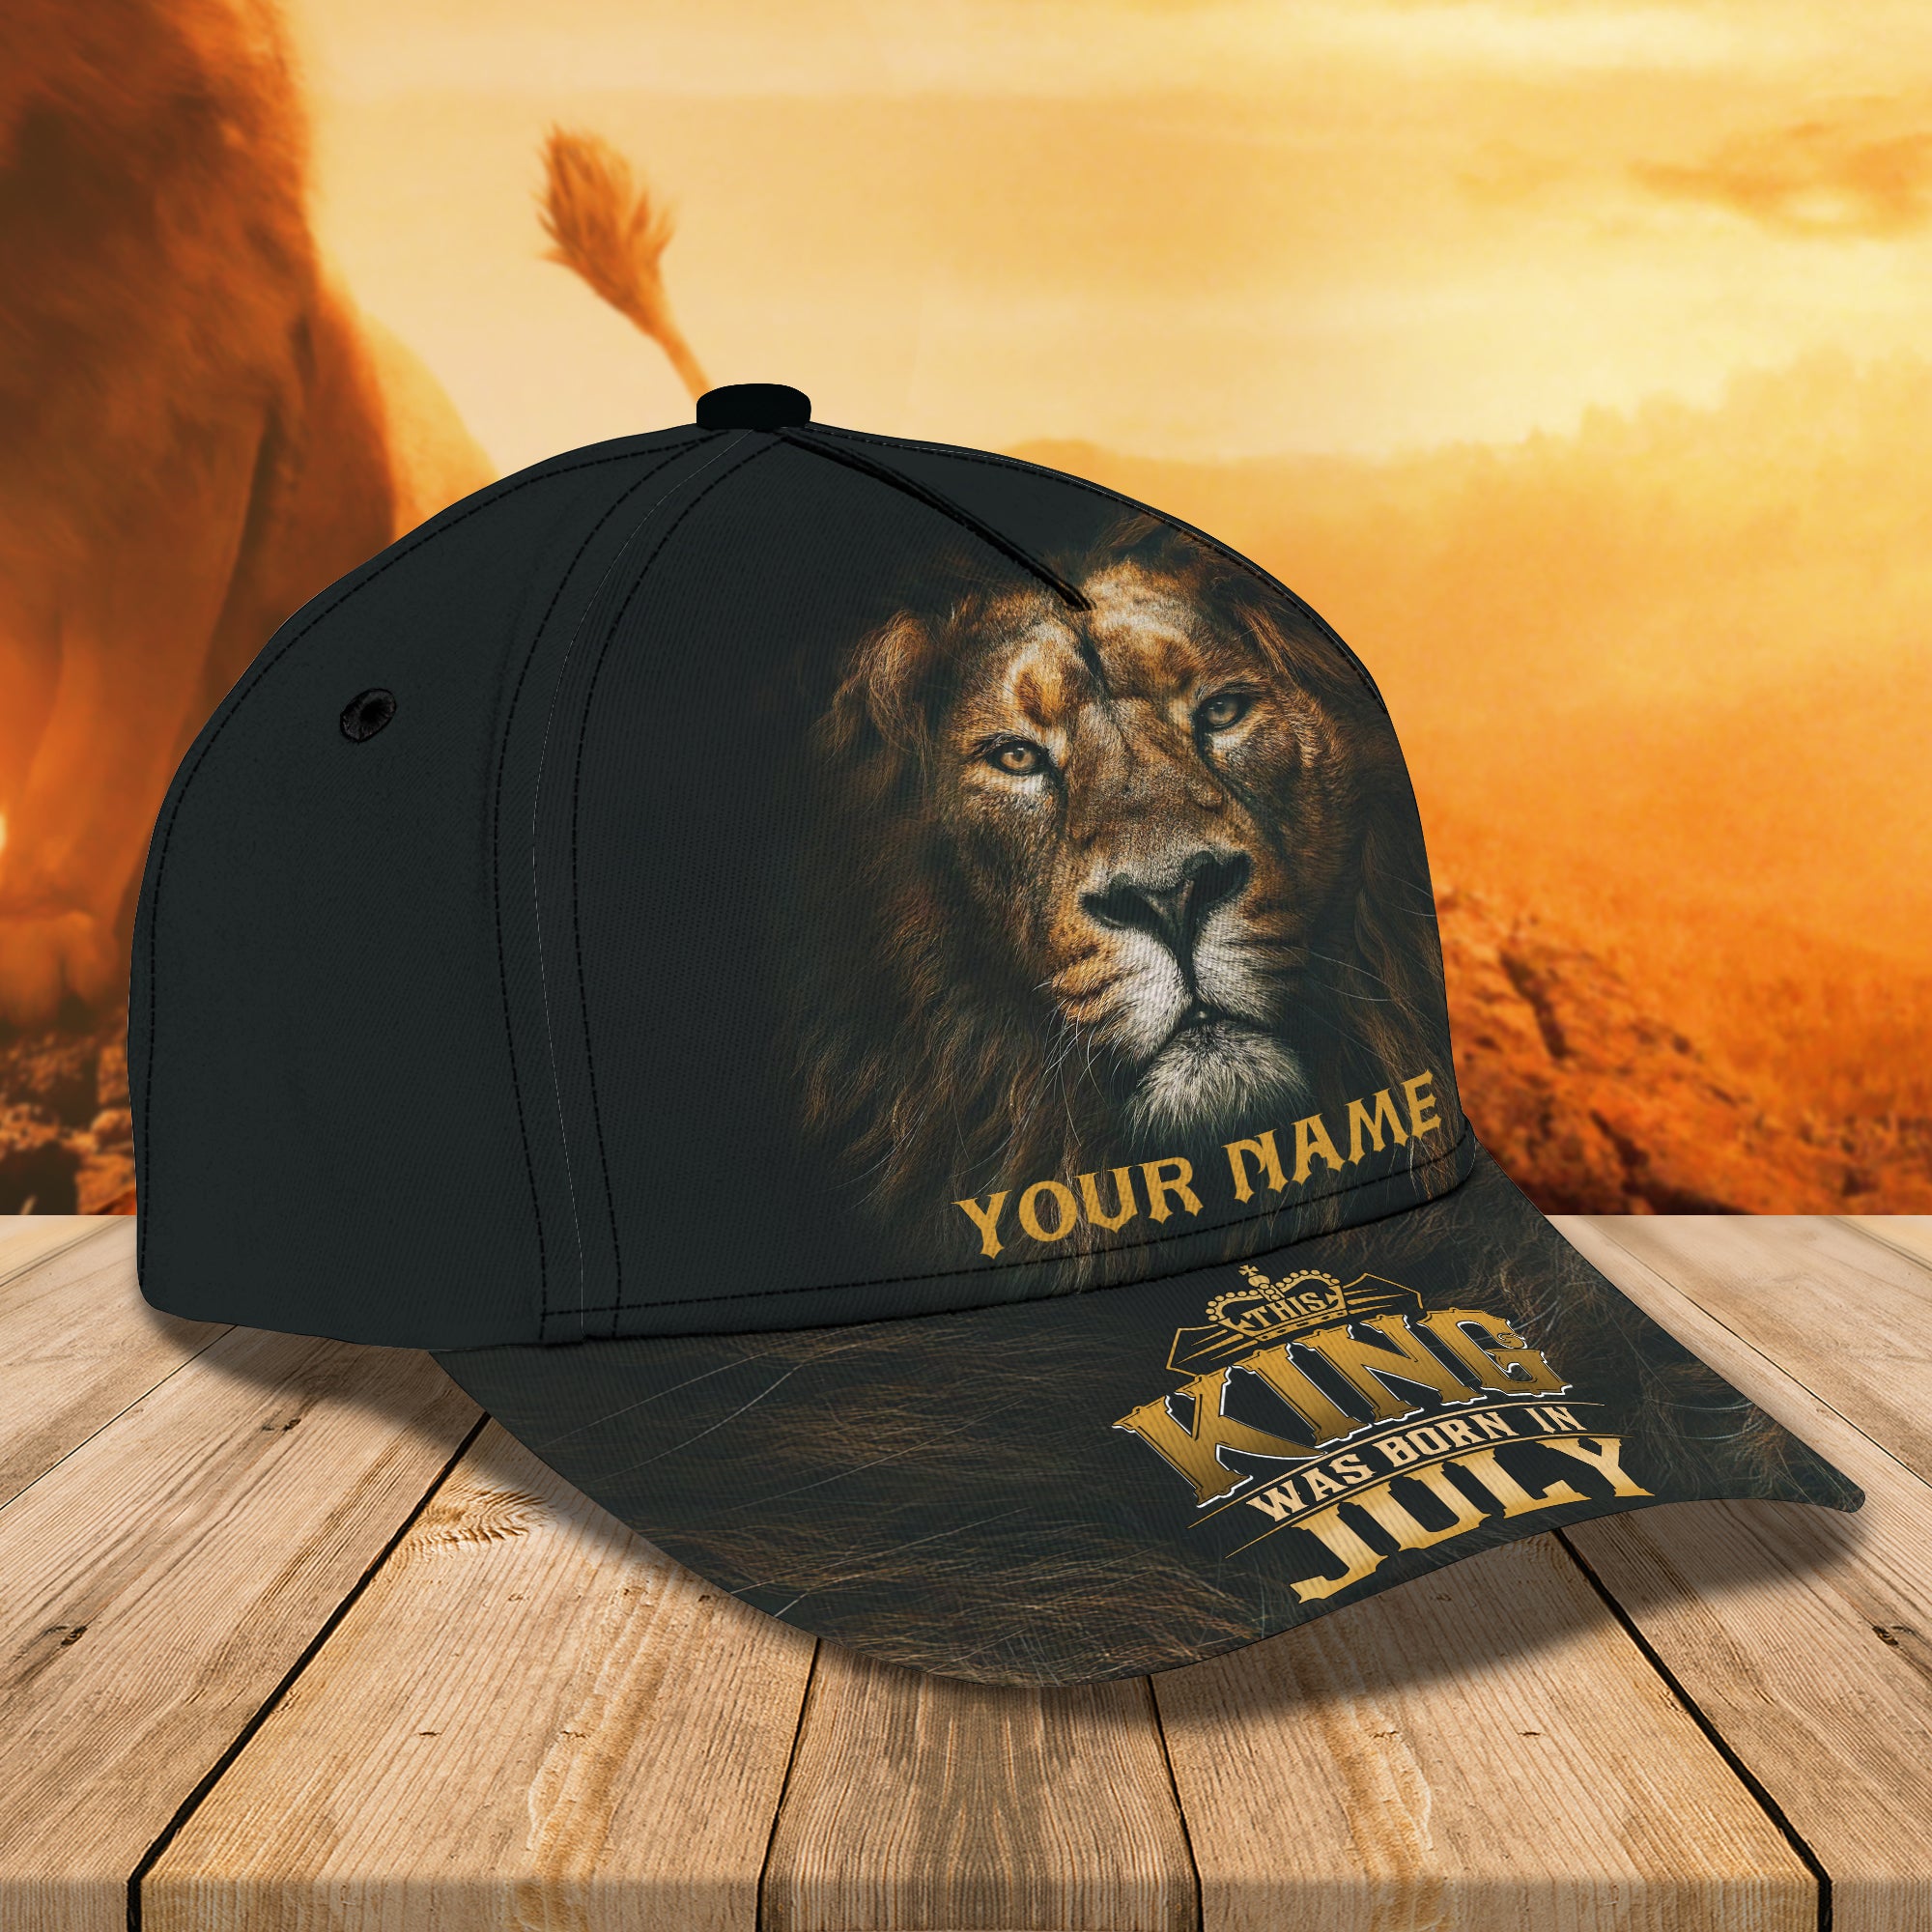 Kings Was Born In July - Personalized Name Cap - Tt99-129